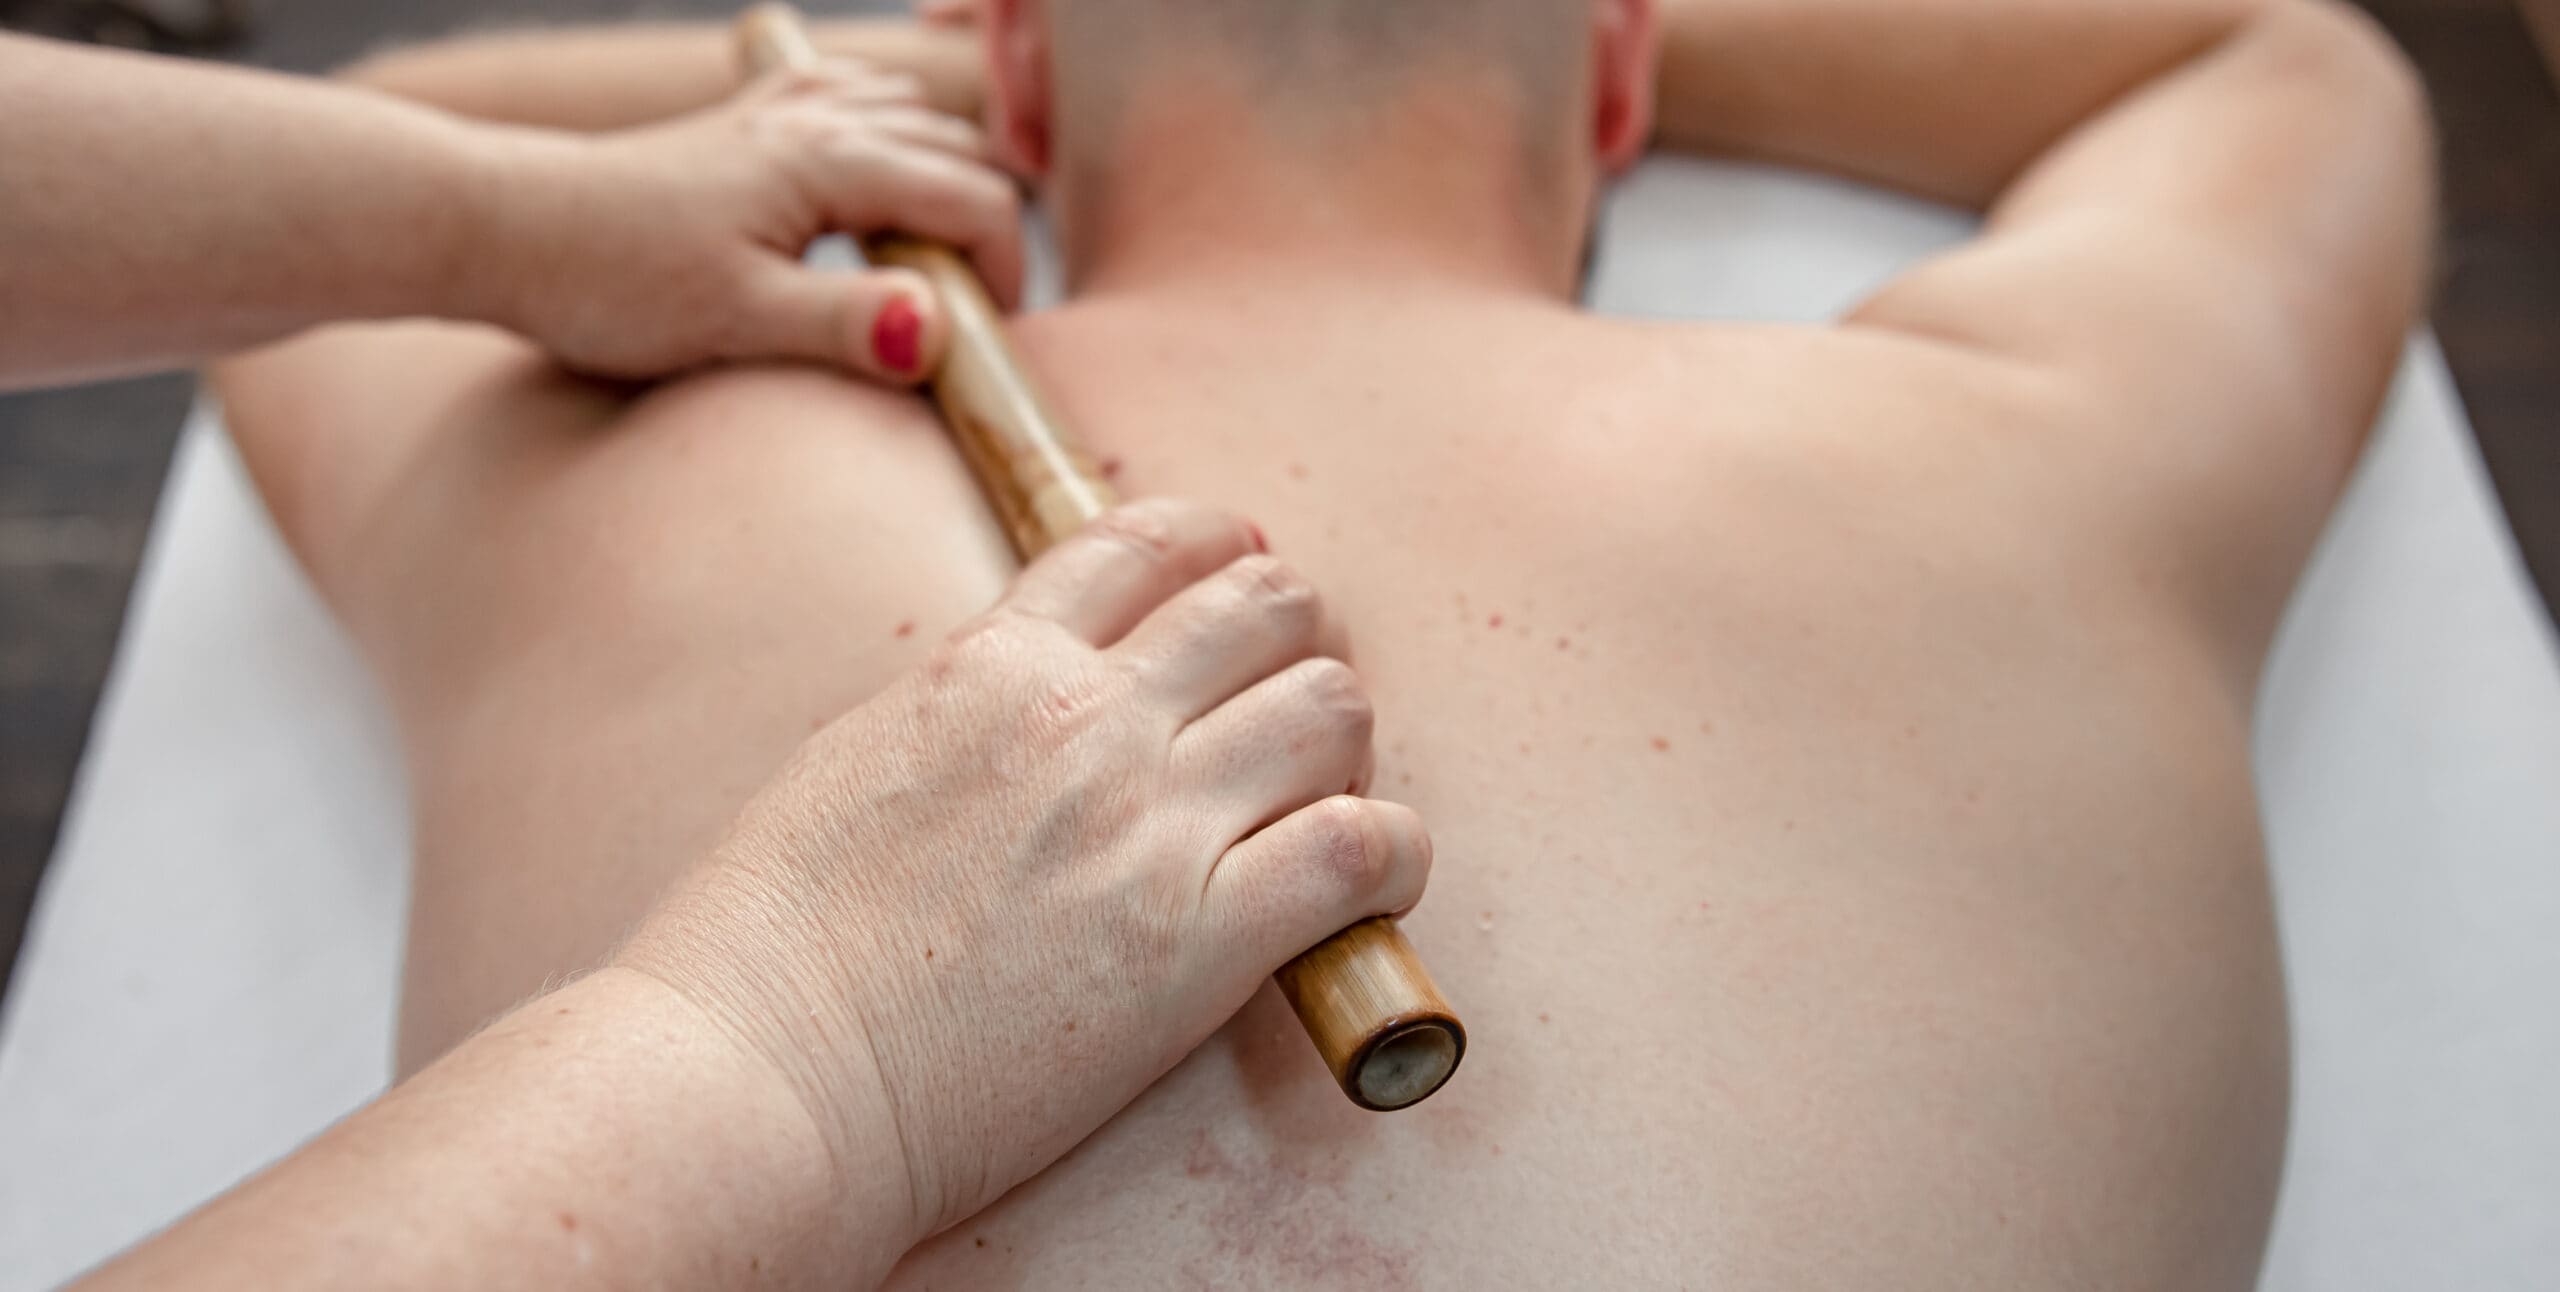 the-masseur-using-massage-bamboo-sticks-during-treatment-scaled